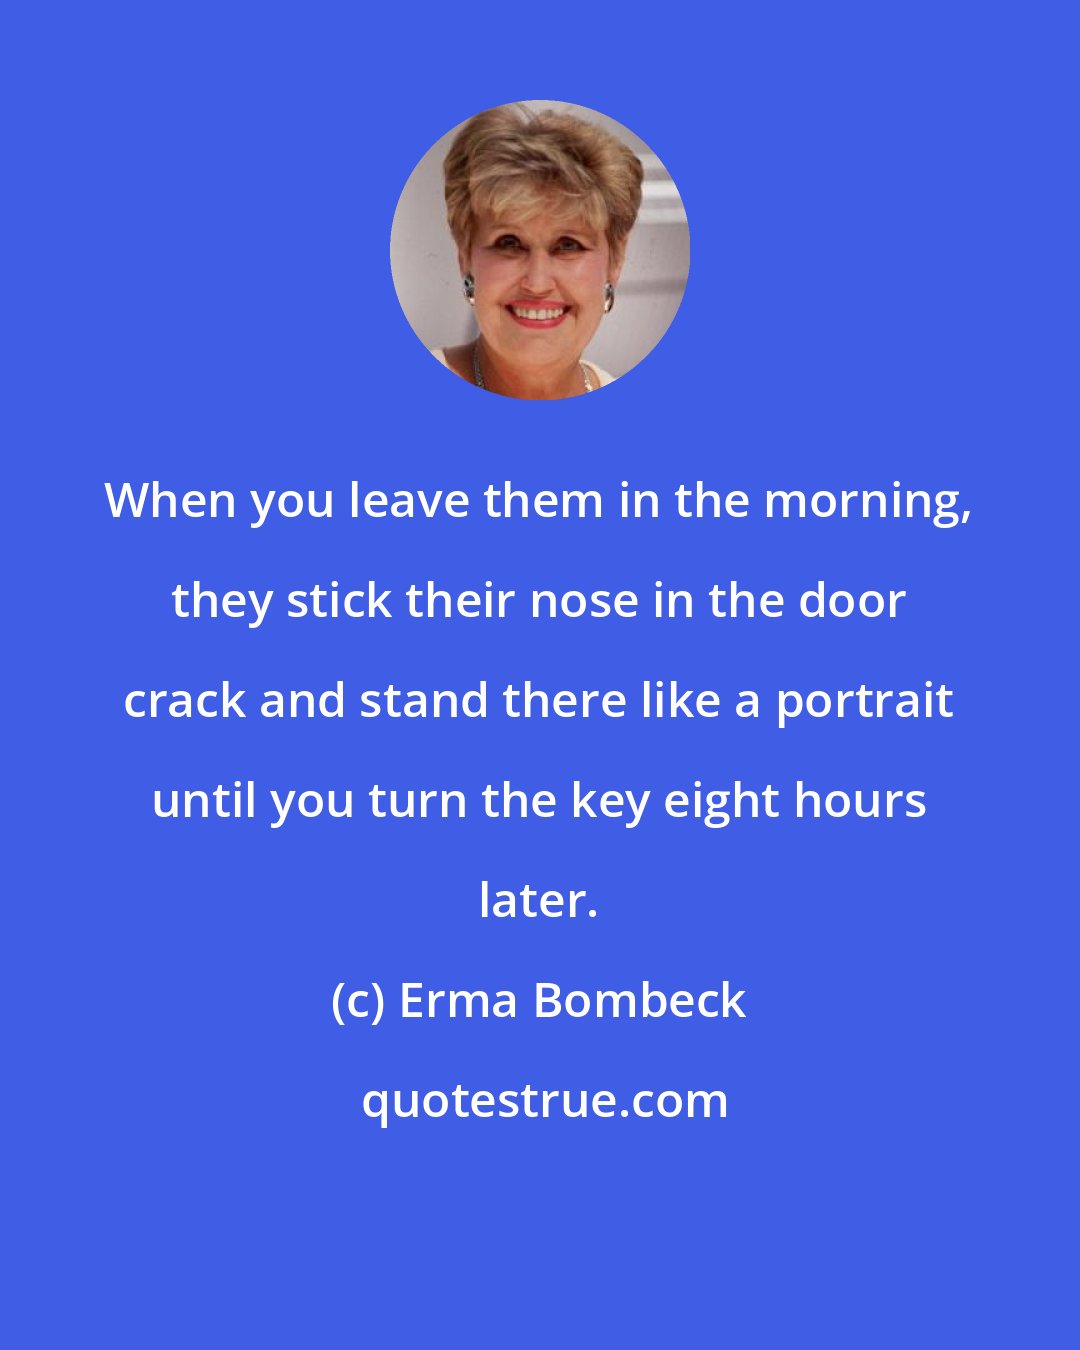 Erma Bombeck: When you leave them in the morning, they stick their nose in the door crack and stand there like a portrait until you turn the key eight hours later.